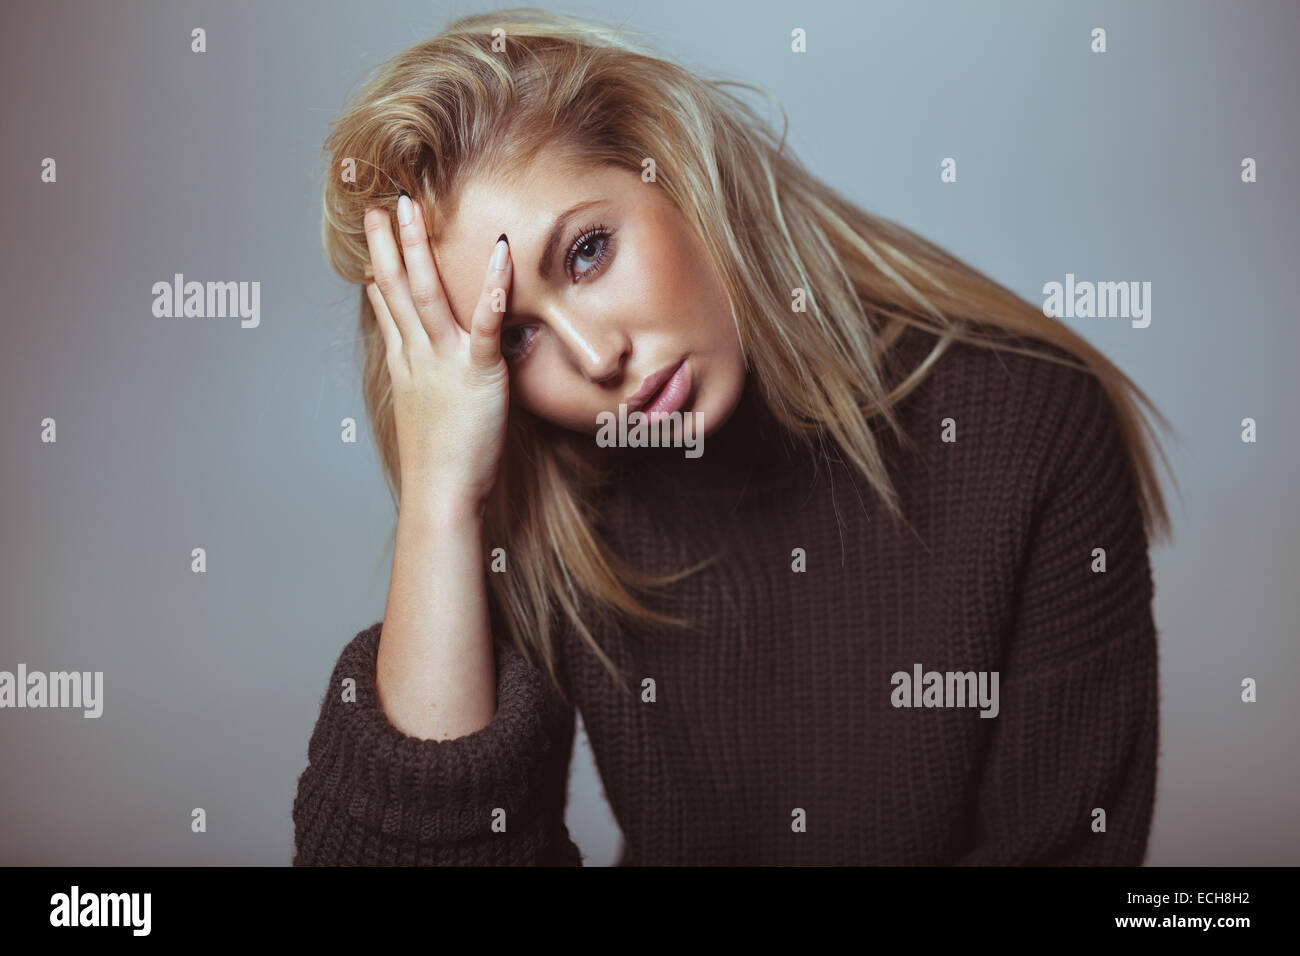 Contemplative woman in sweater. Pretty young woman looking serious. Stock Photo